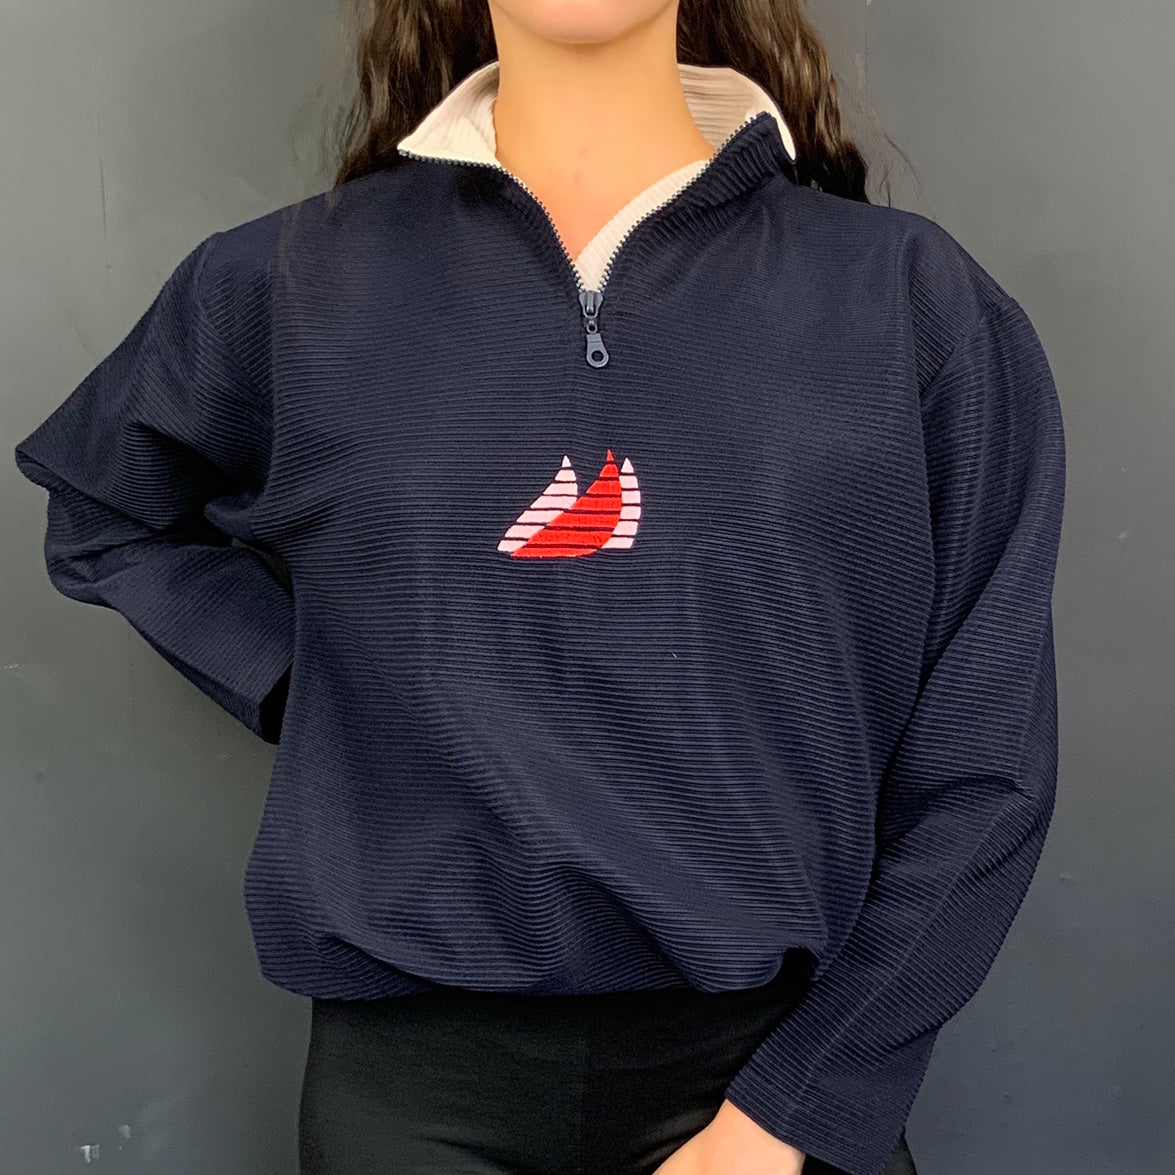 Vintage Sailing Zip Up Sweatshirt with Embroidered Sails